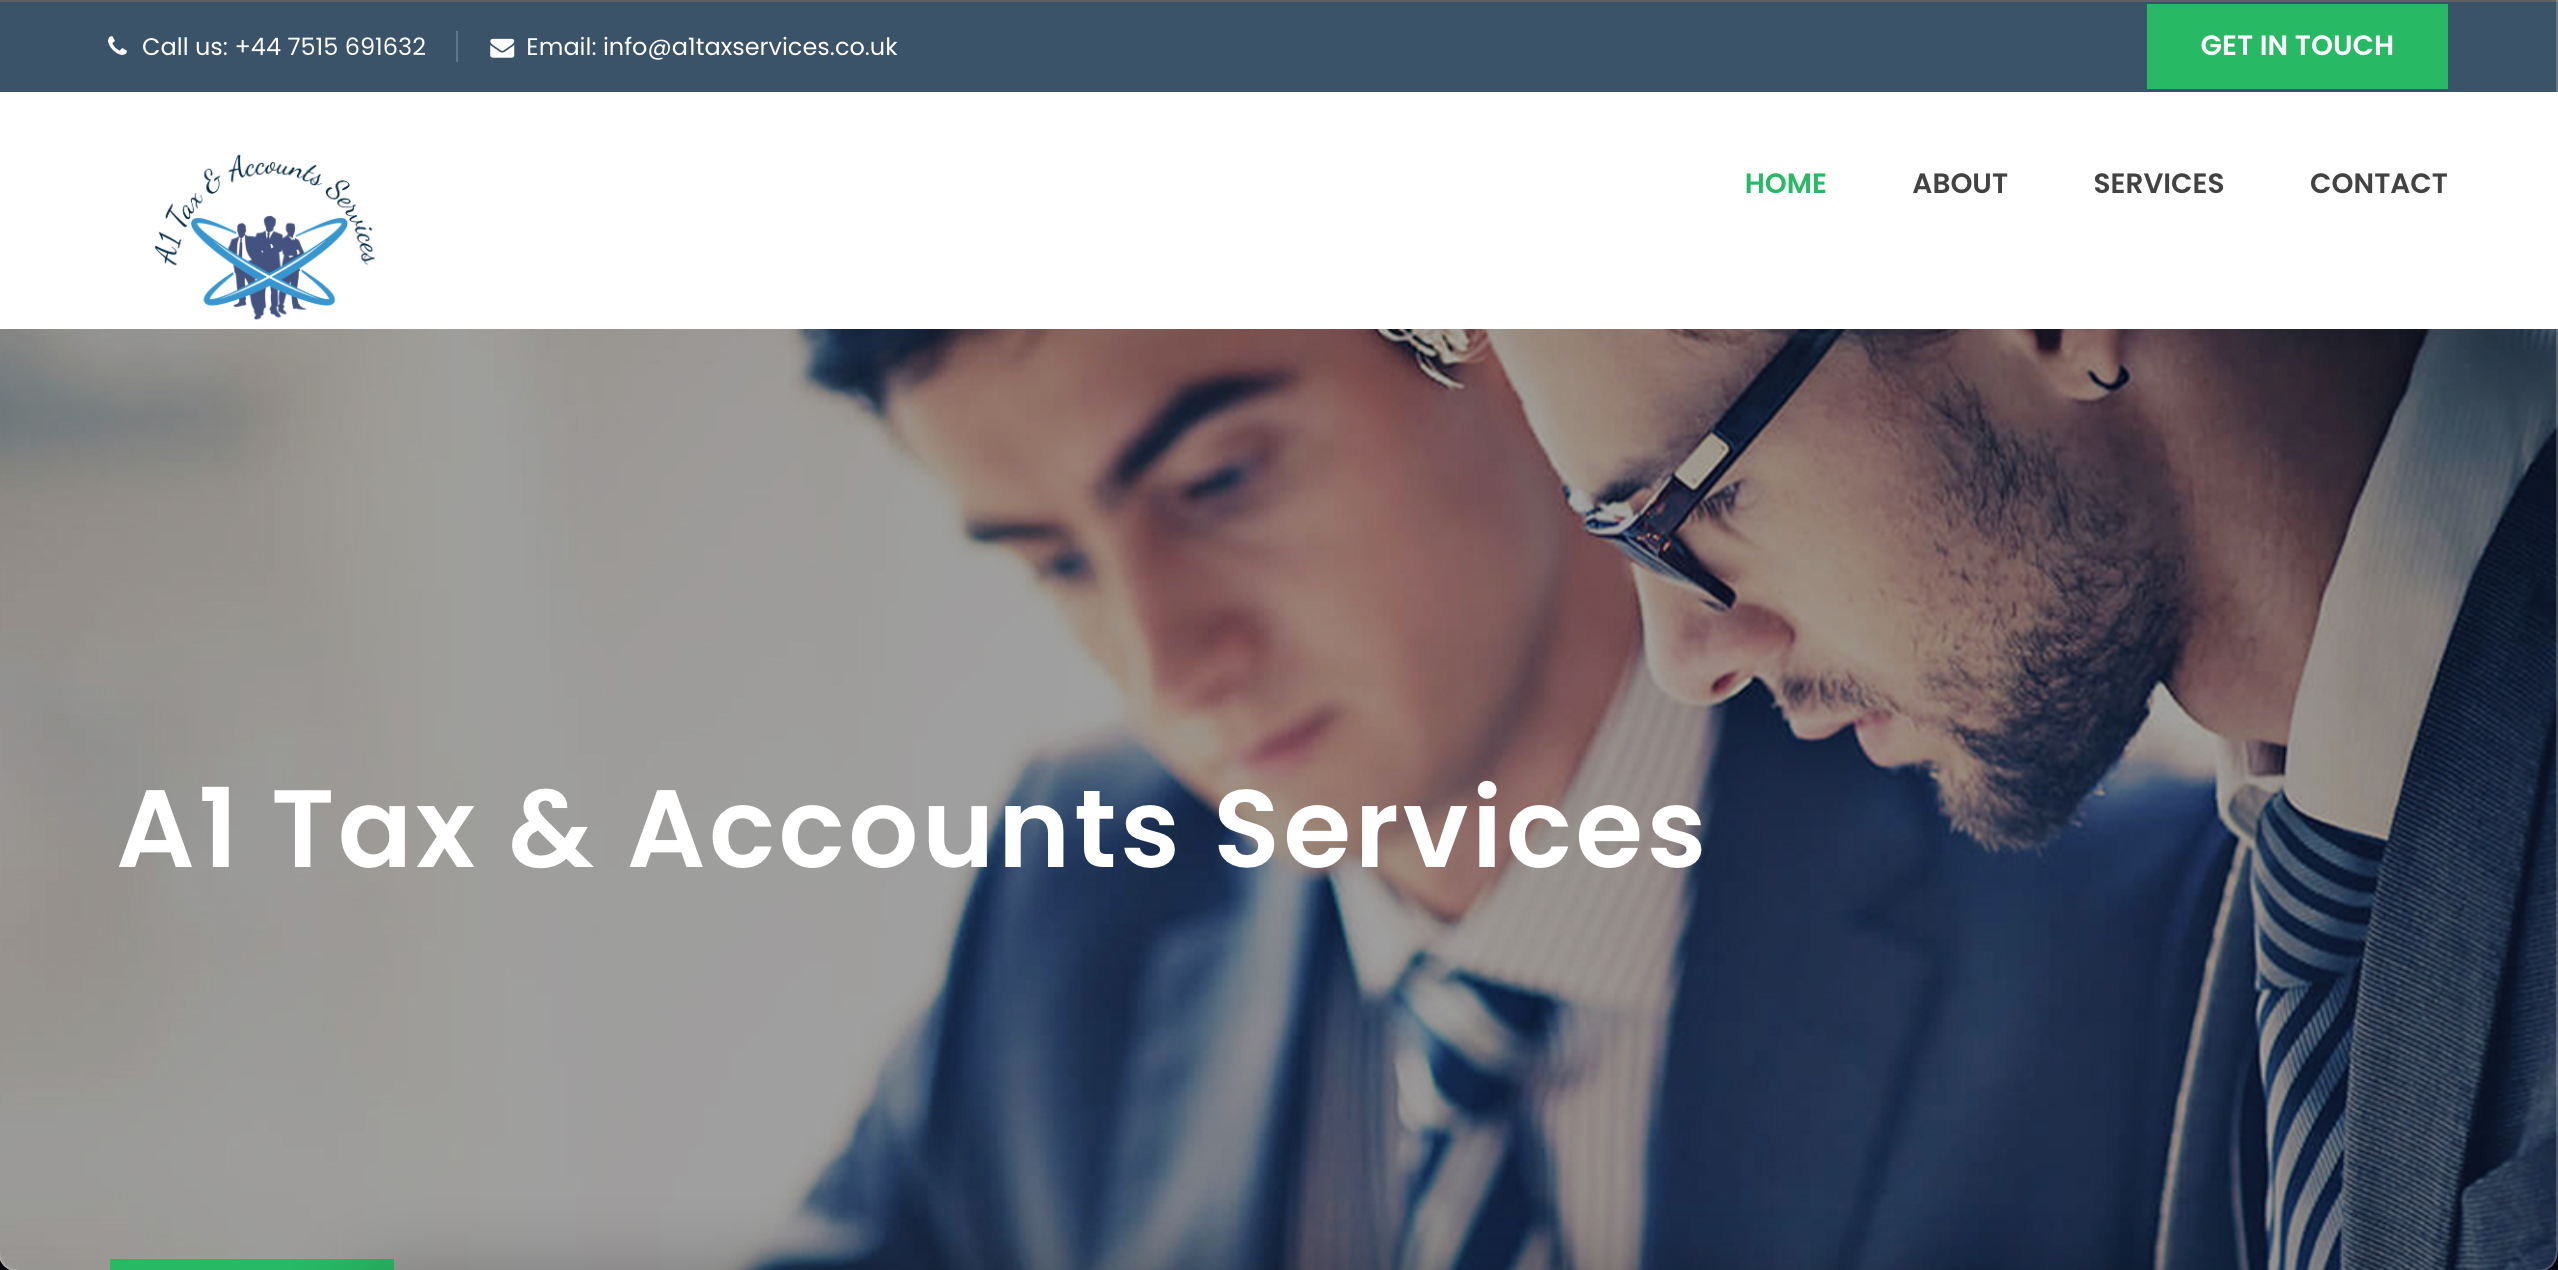 A1 Tax & Accountants Services